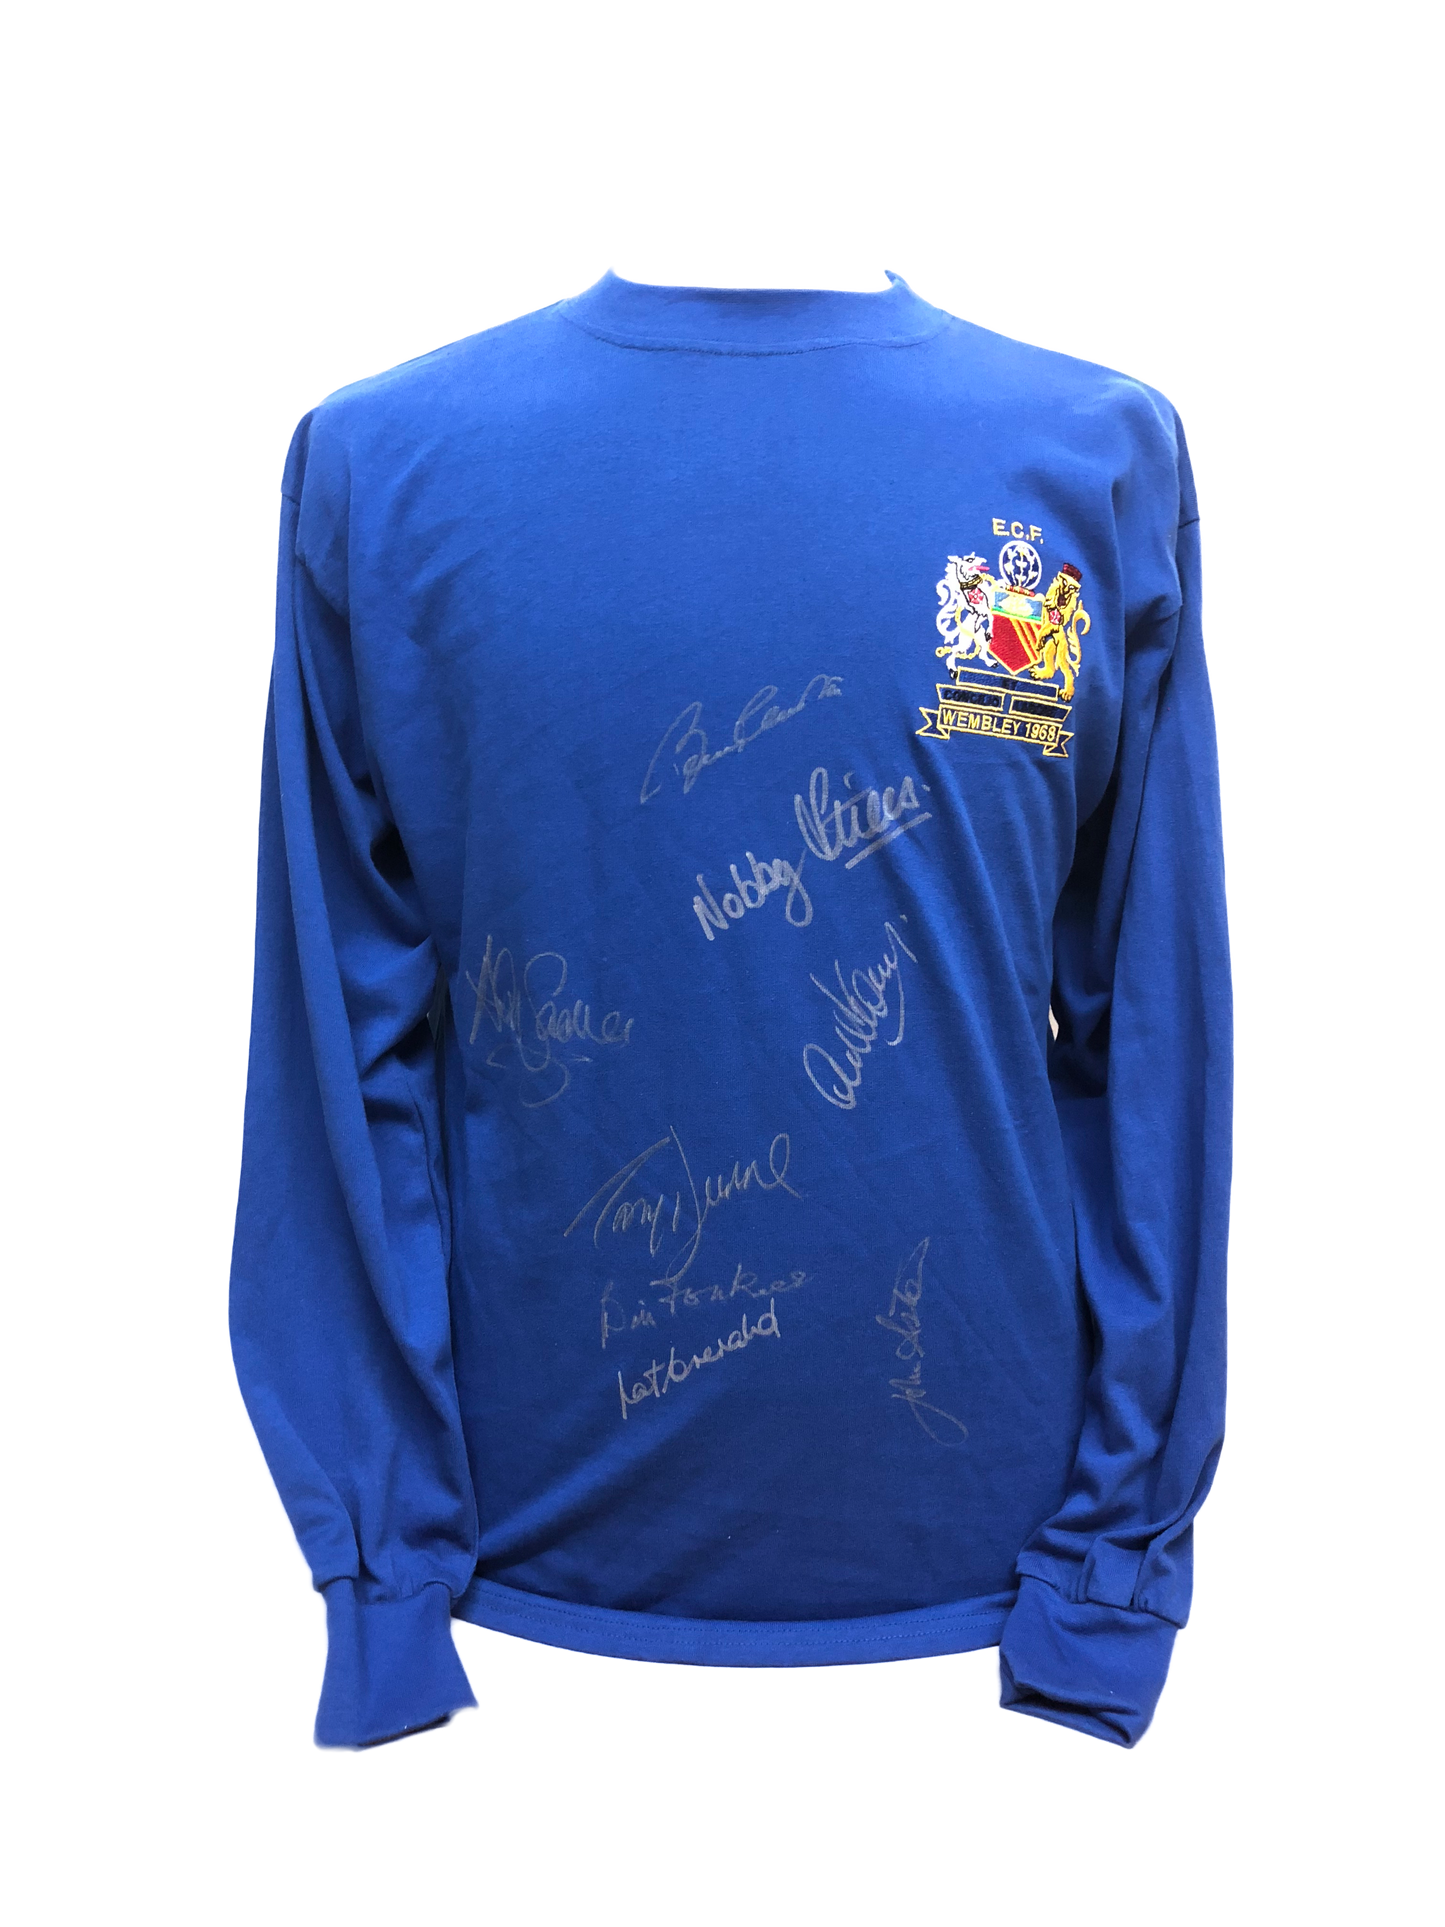 Manchester United 1968 European Cup Final Shirt Signed by 8